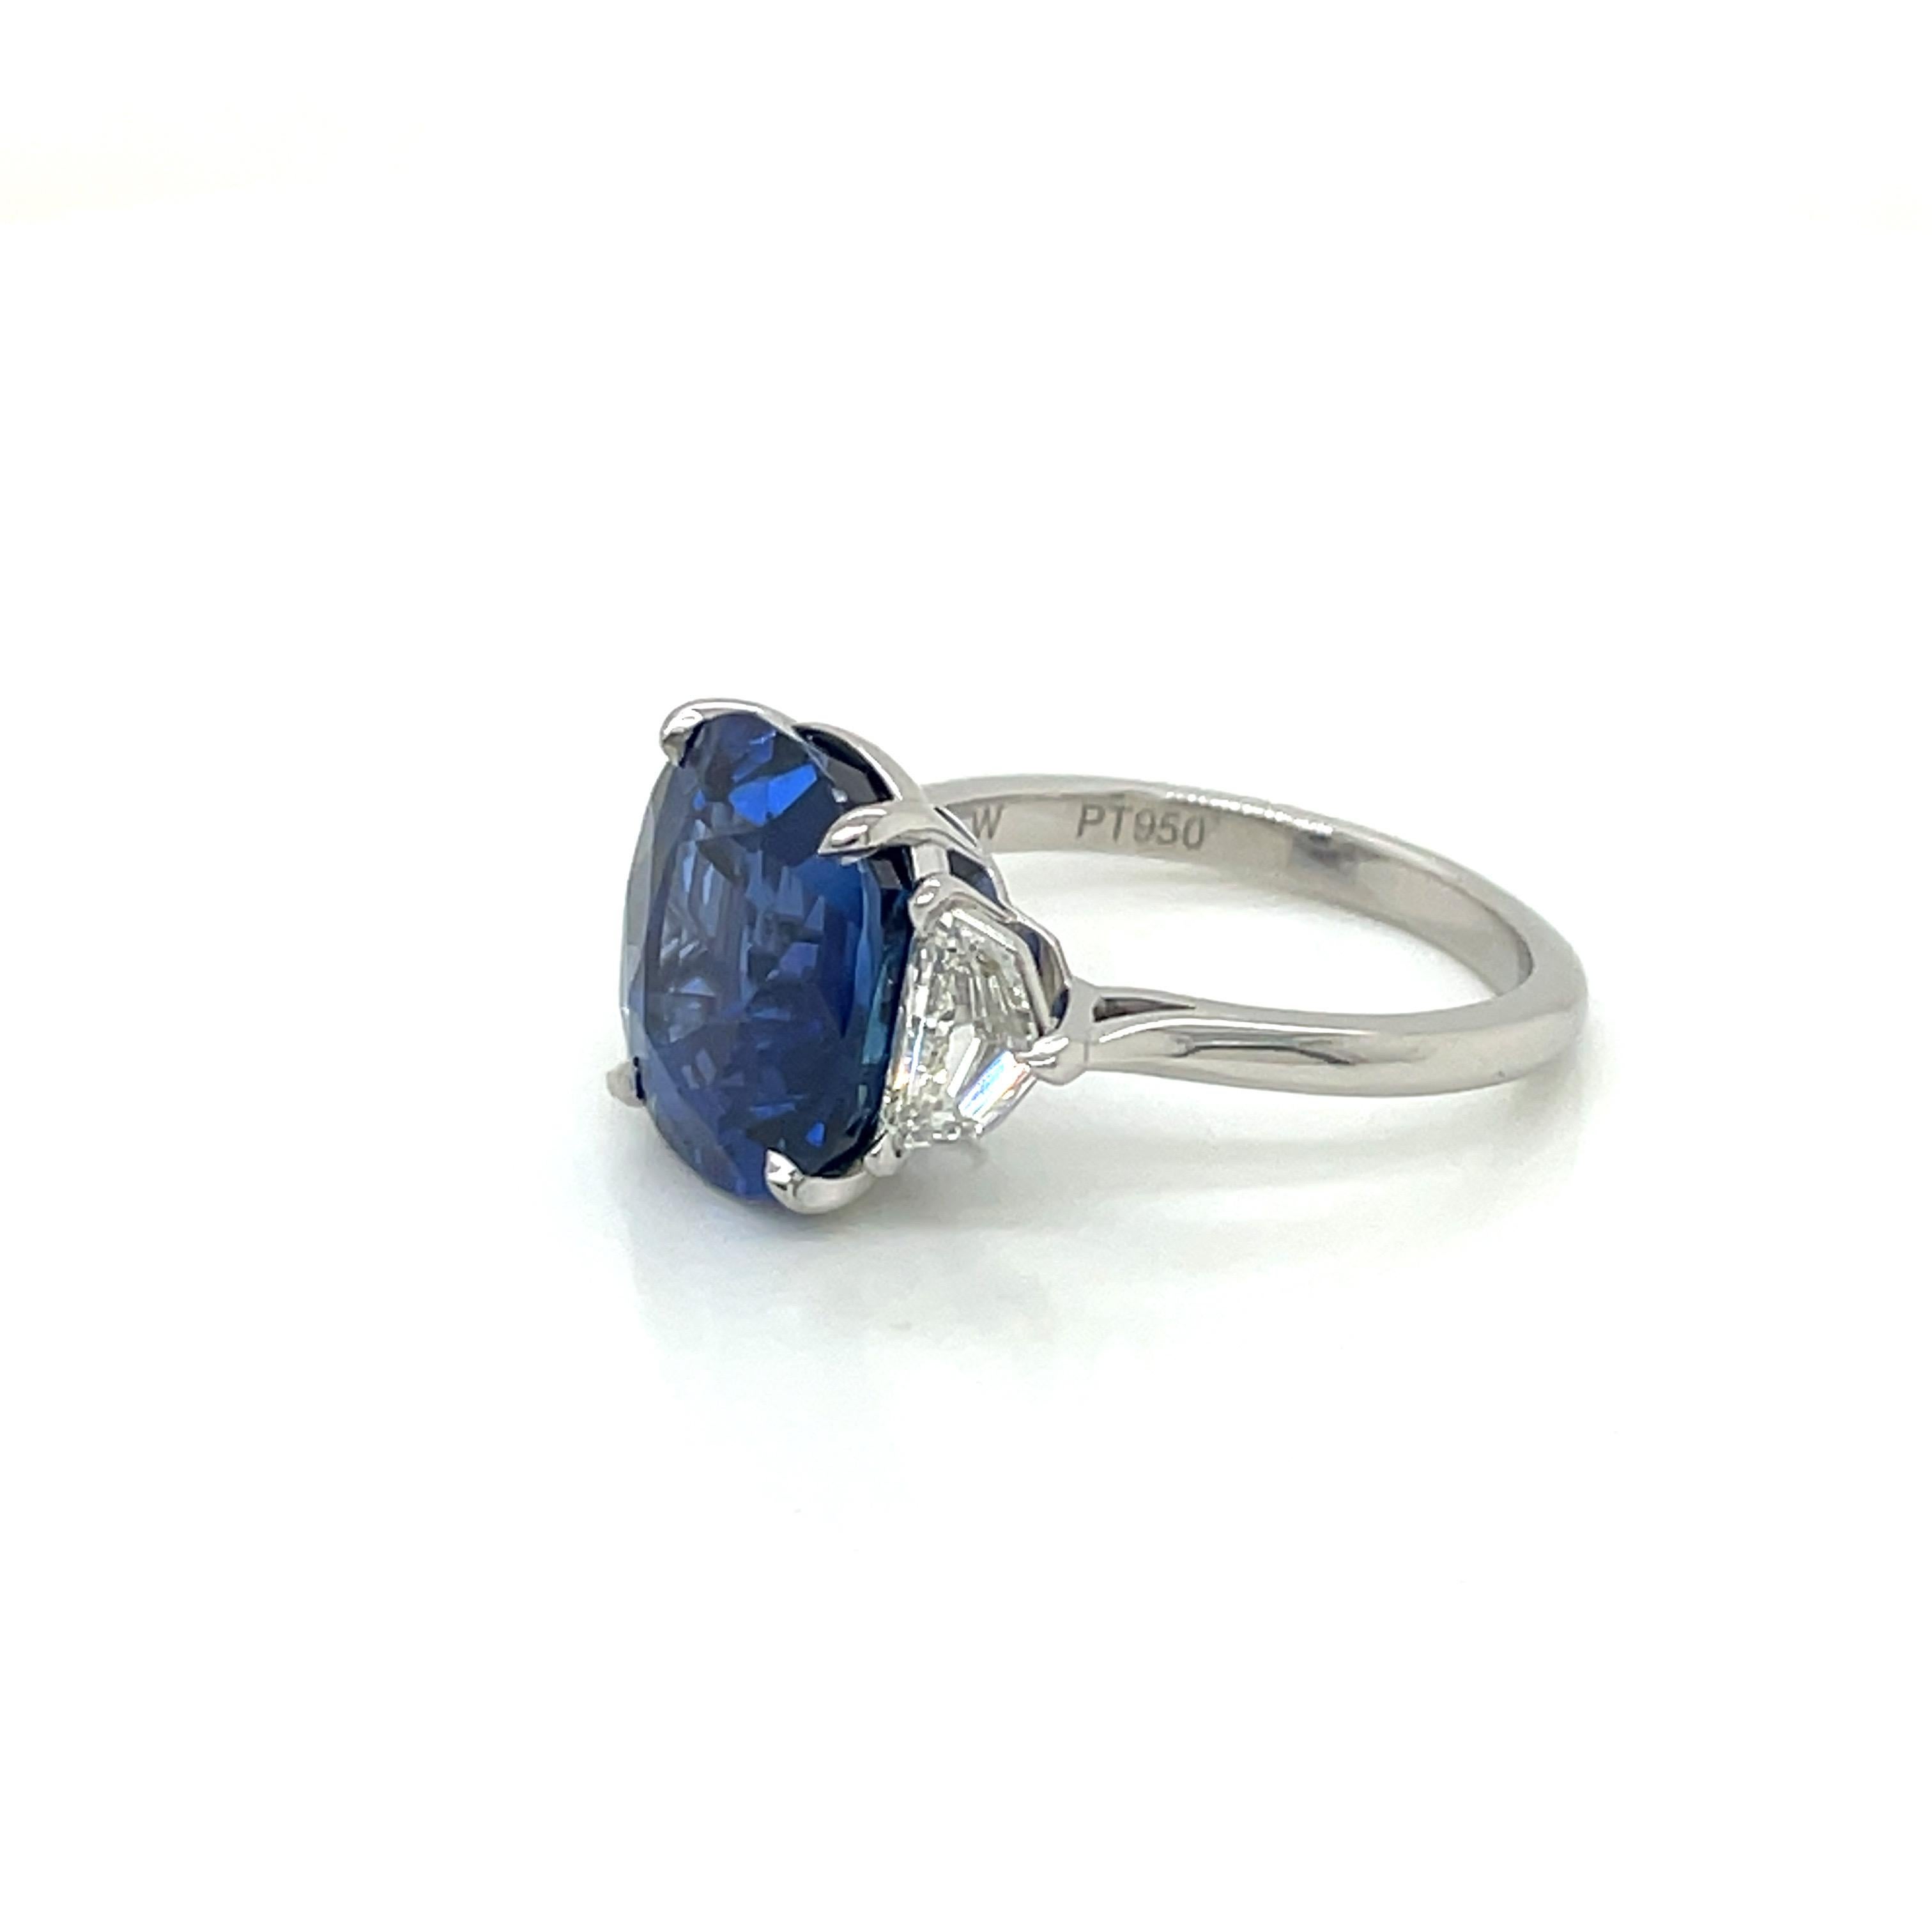 This new and exceptional 7.63 carat no heat Burmese sapphire is set in a handmade platinum setting. This stunning sapphire is flanked by a pair of white Cadillac-shaped side diamonds weighing .73cttw, F color, VS clarity.

This sapphire is rare and